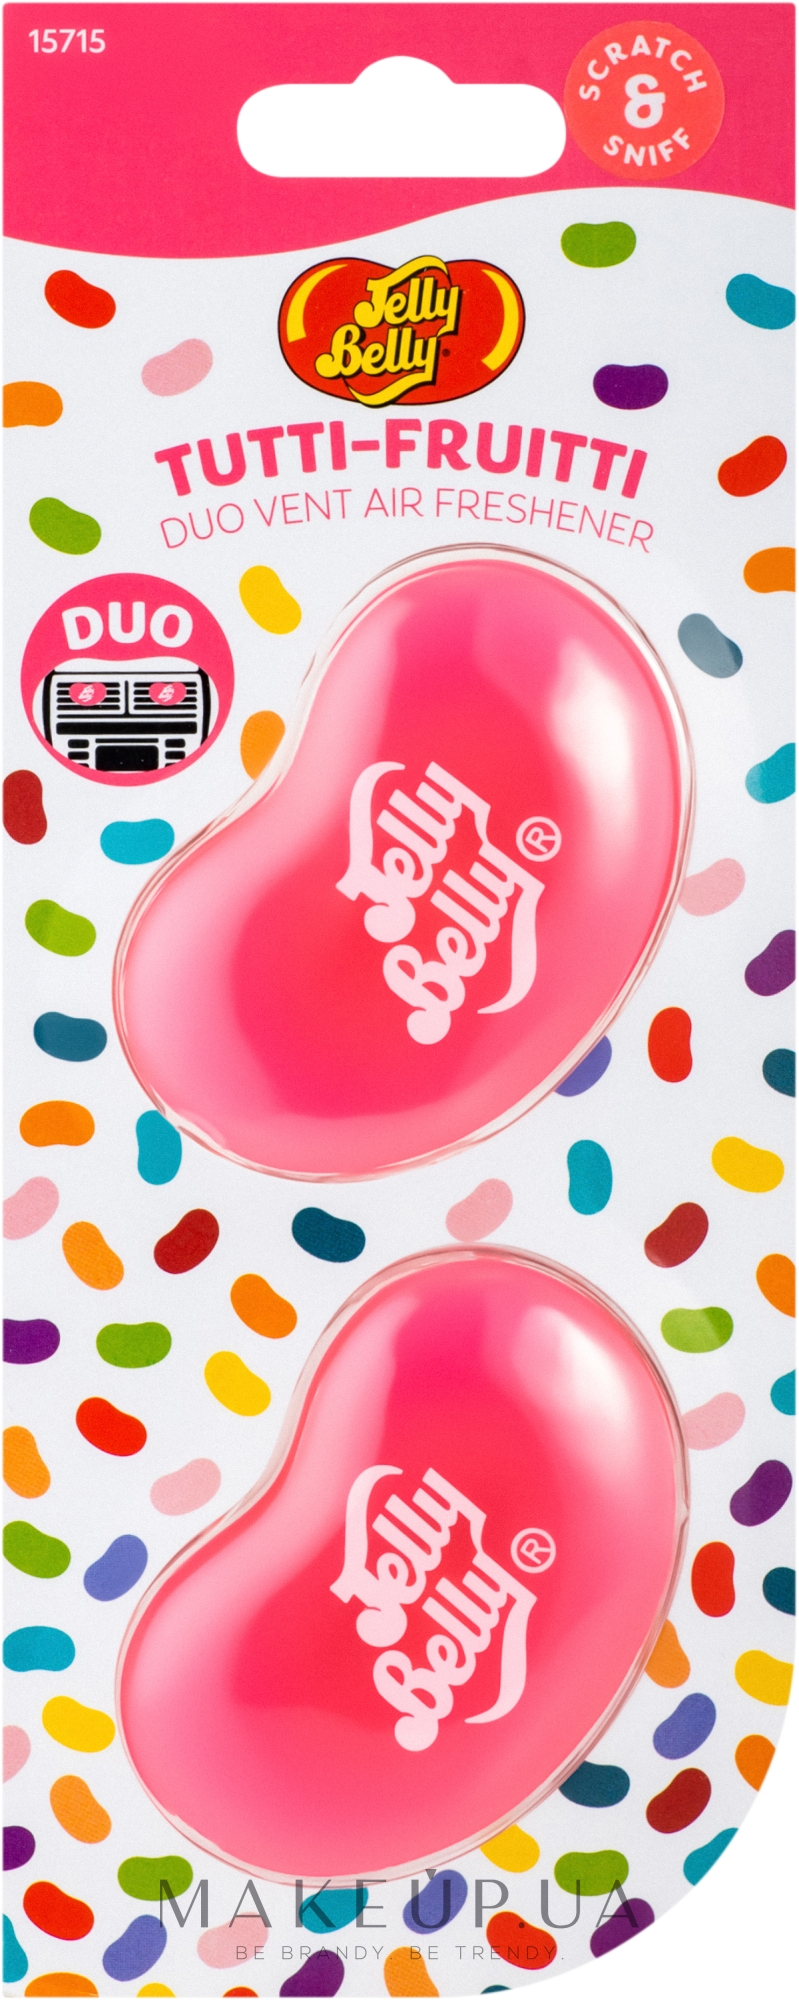 Jelly air. Ароматизатор Джелли Белли. Ароматизатор в машину Jelly belly. Гель Bloom Bubble Gum. Bubble Gum Pack.